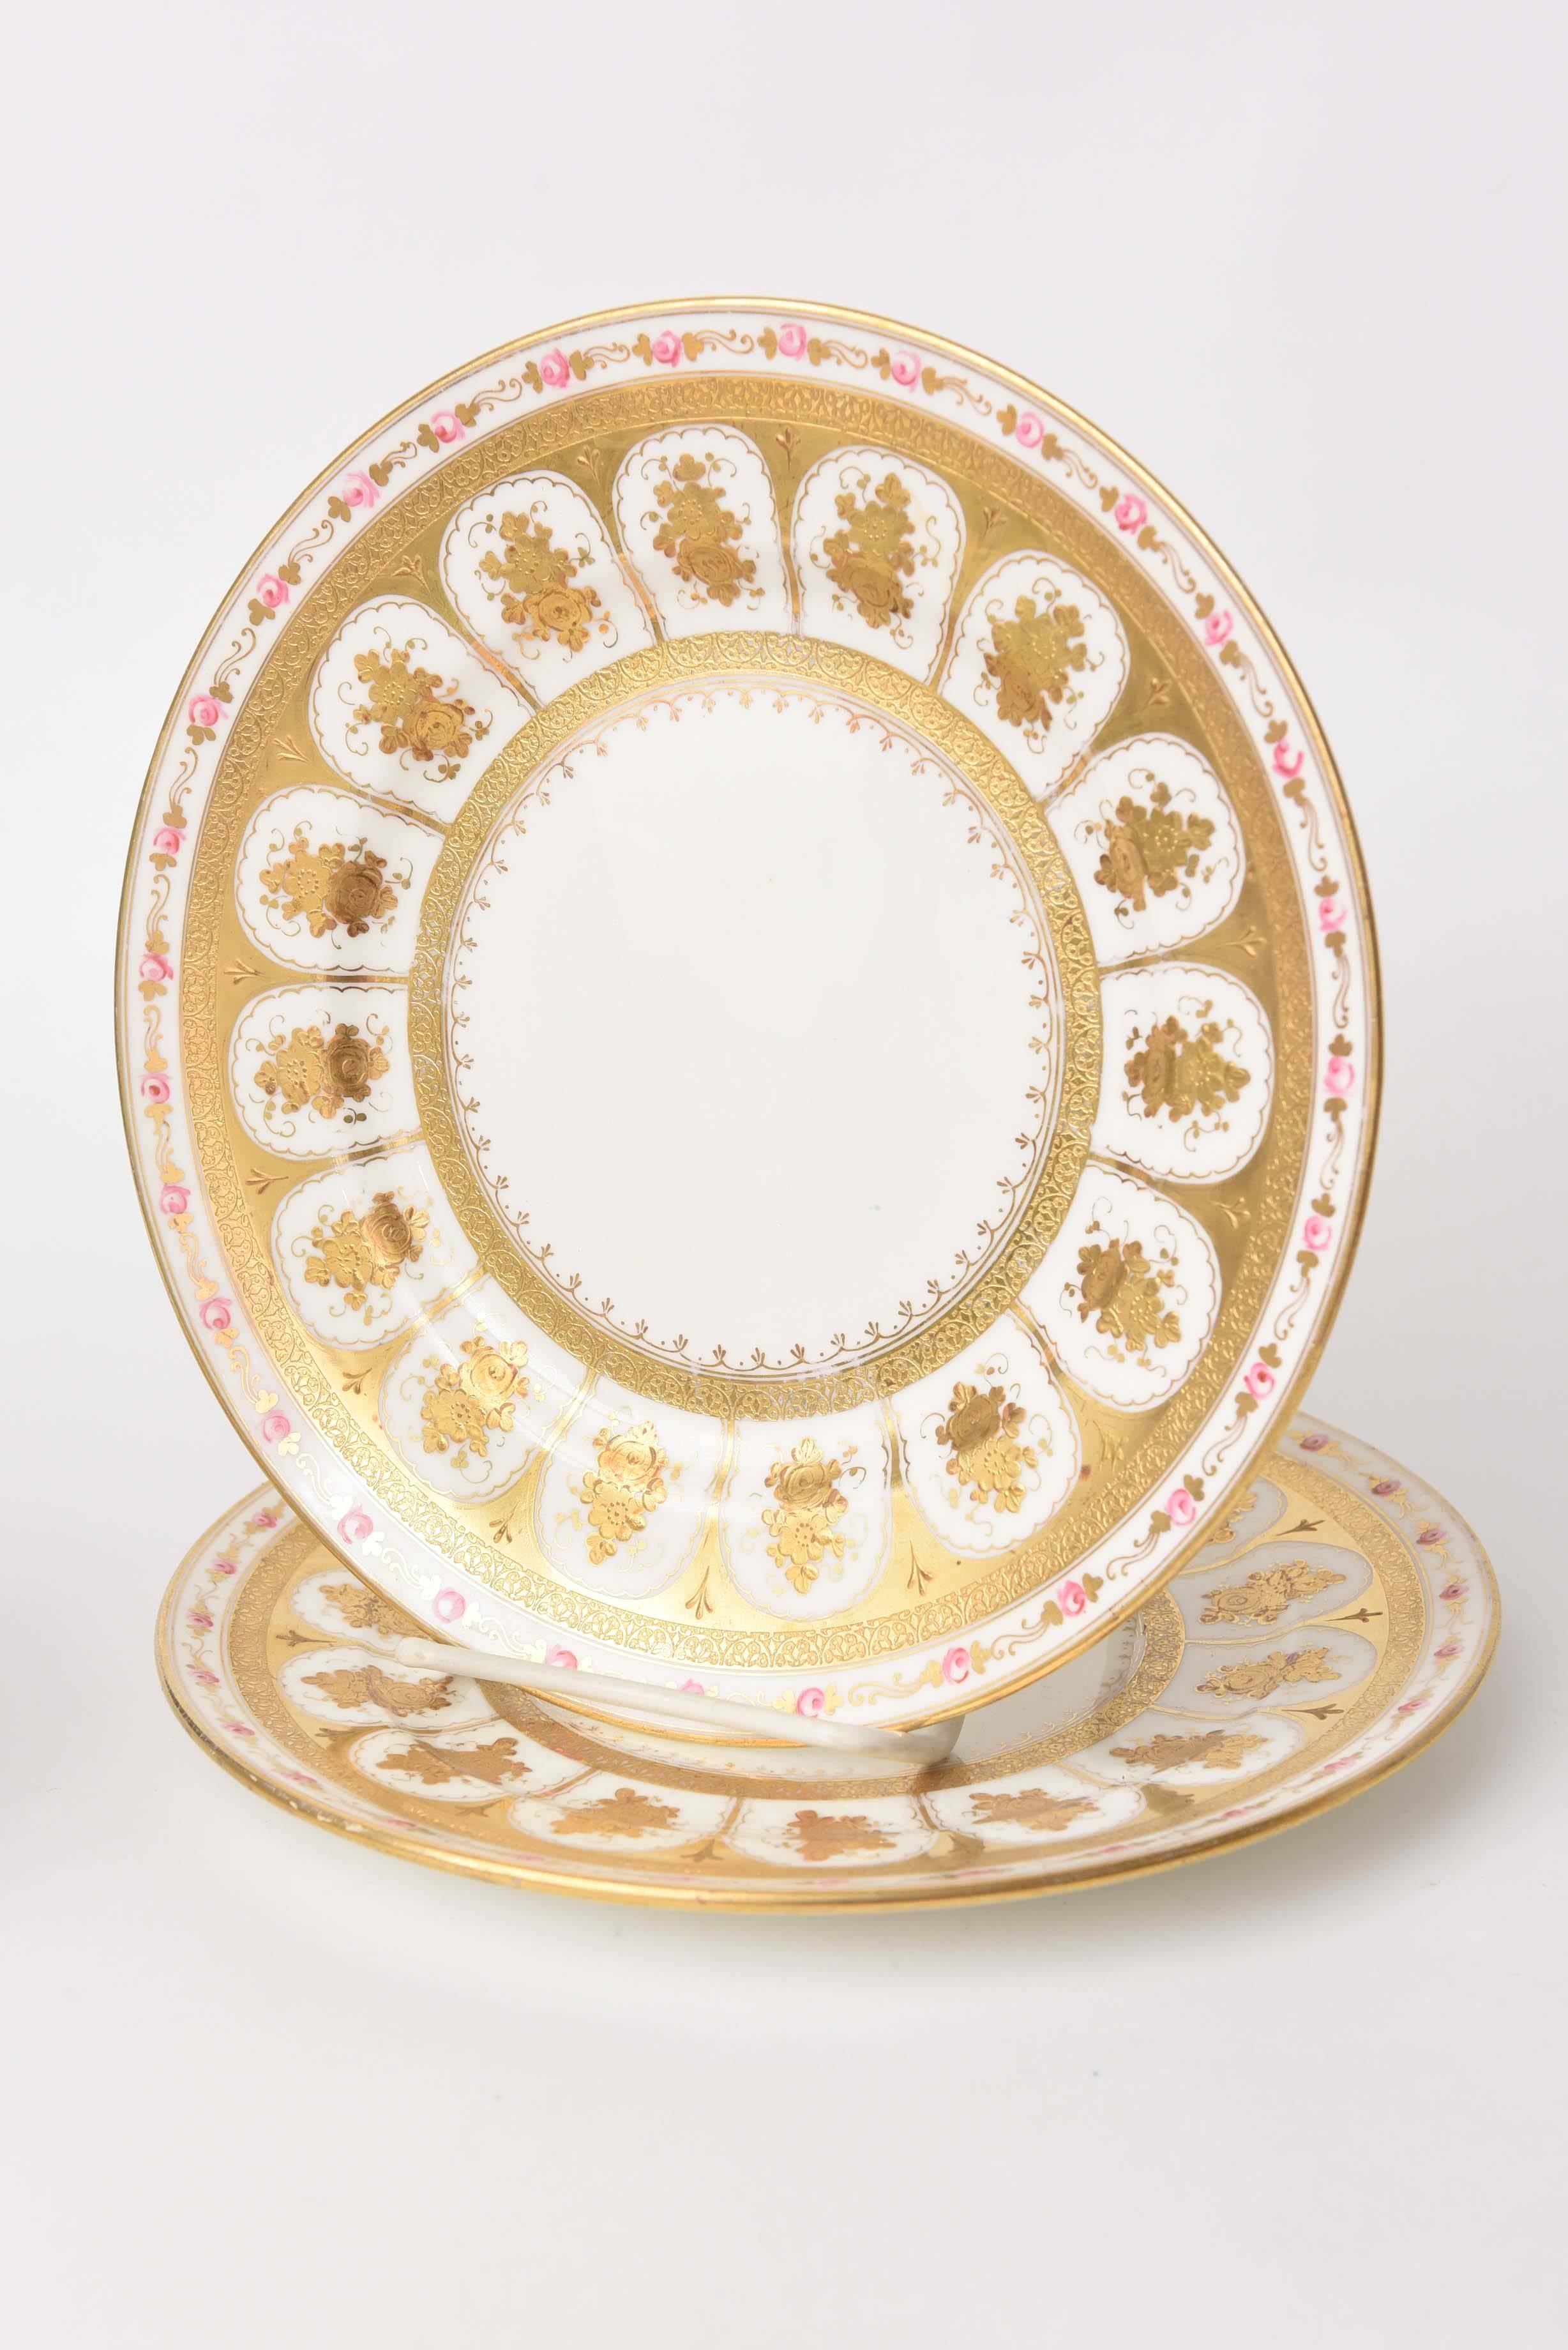 What nice details this set of 12 plates have. Great raised gilt encrusted borders in an interesting design along with sweet hand-painted floral on the edge. A great size for everything: first course, salads or desserts. They are in very nice antique